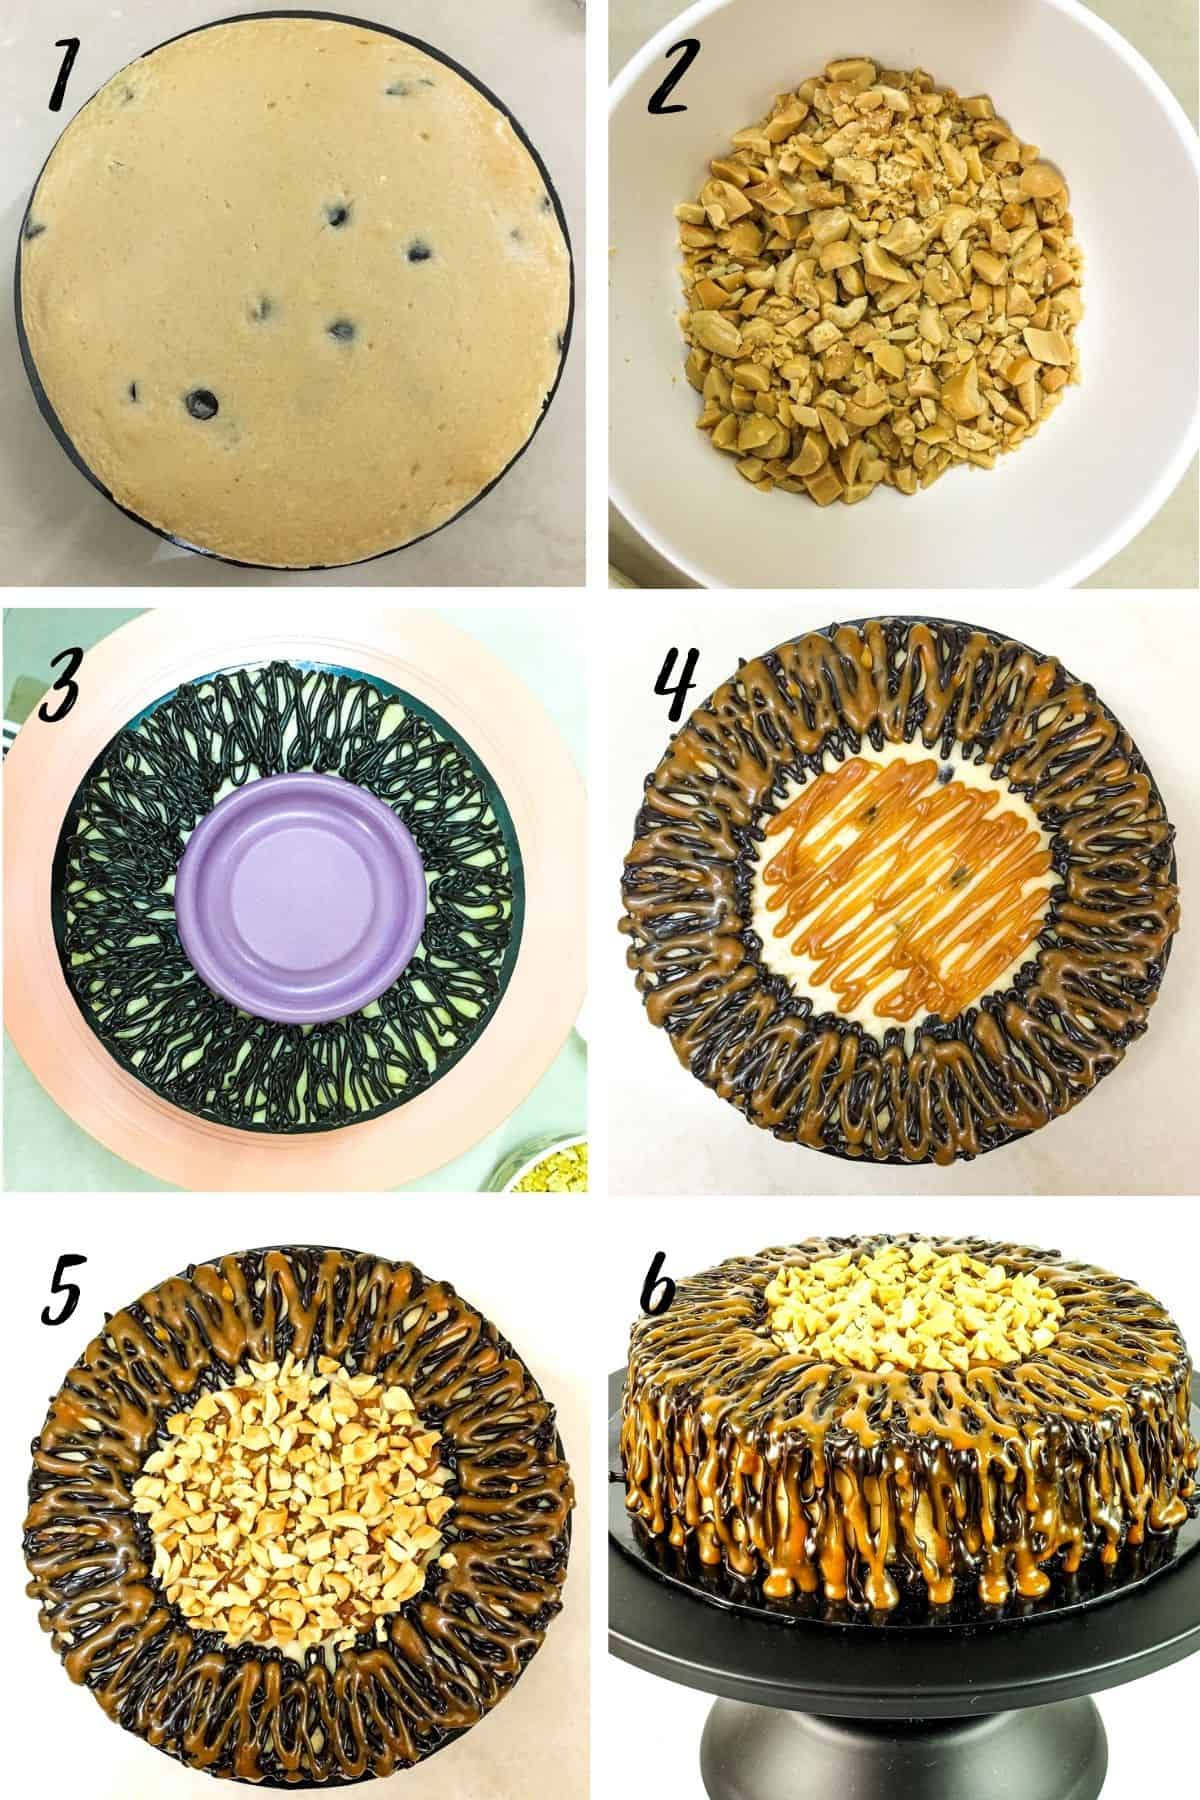 A poster of 6 images showing how to decorate a peanut butter cheesecake with chopped peanuts and chocolate and caramel drizzle.